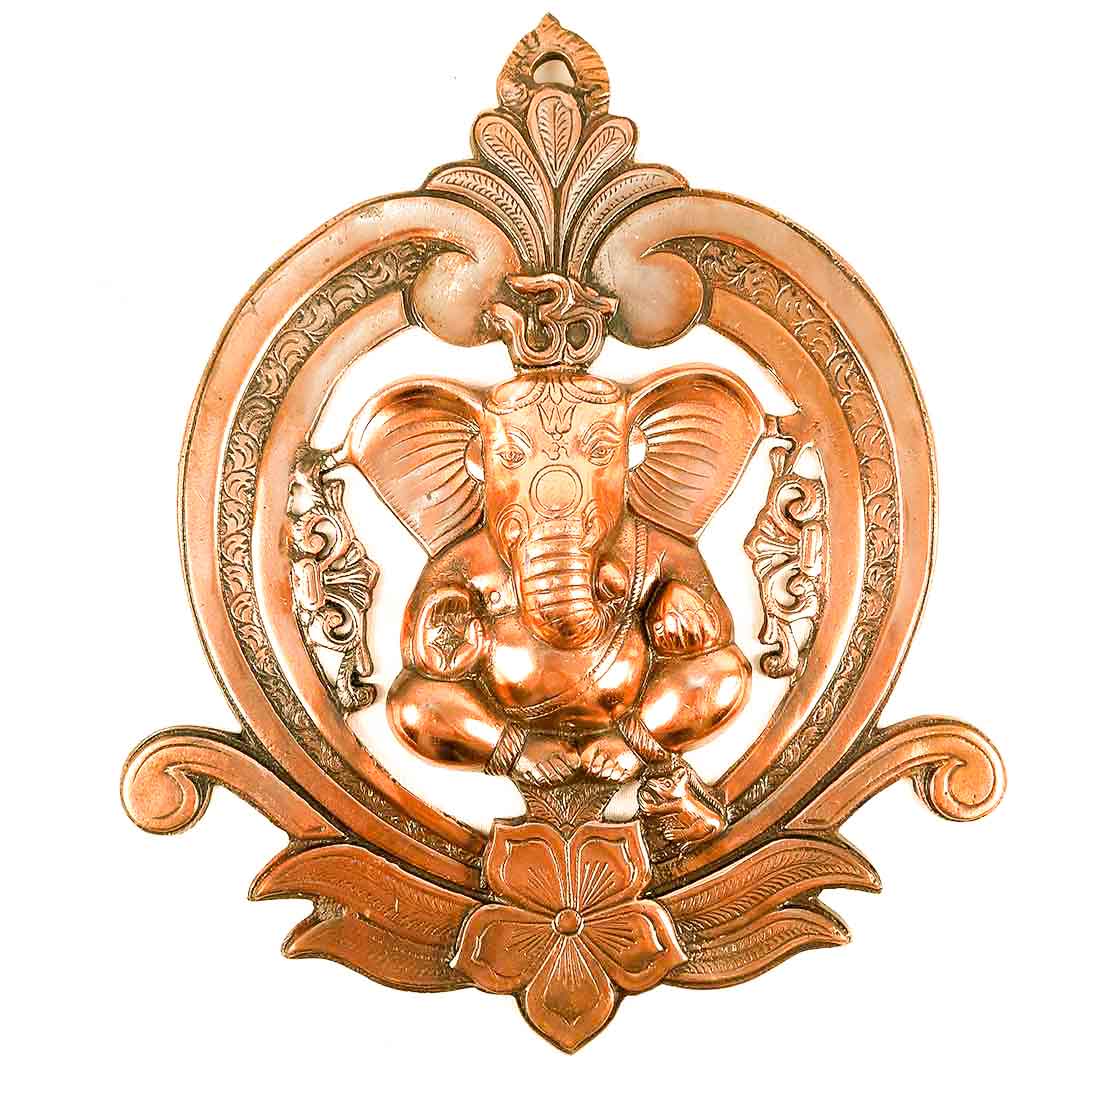 Ganesh Wall Hanging Murti | Ganesha With Om Wall Idol Decor - for Entrance Door | Ganesha Statue Hangings - for Home, Puja, Temple, Religious Decor & Gift -16 Inch